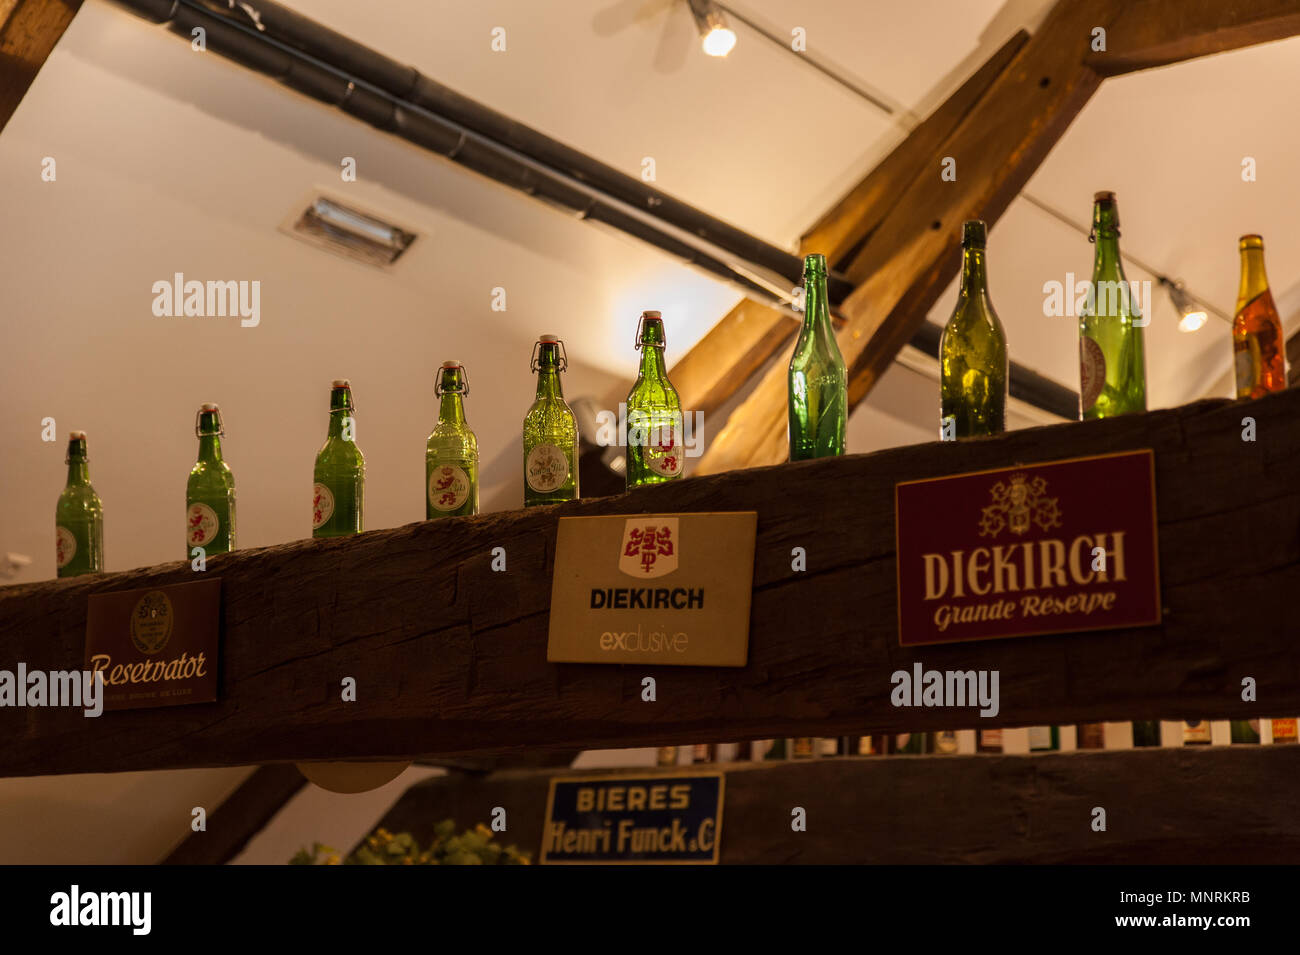 National Brewery Museum, Wiltz, Luxembourg.The exhibits give an overview of 6000 years of history in the manufacture of beer. Stock Photo